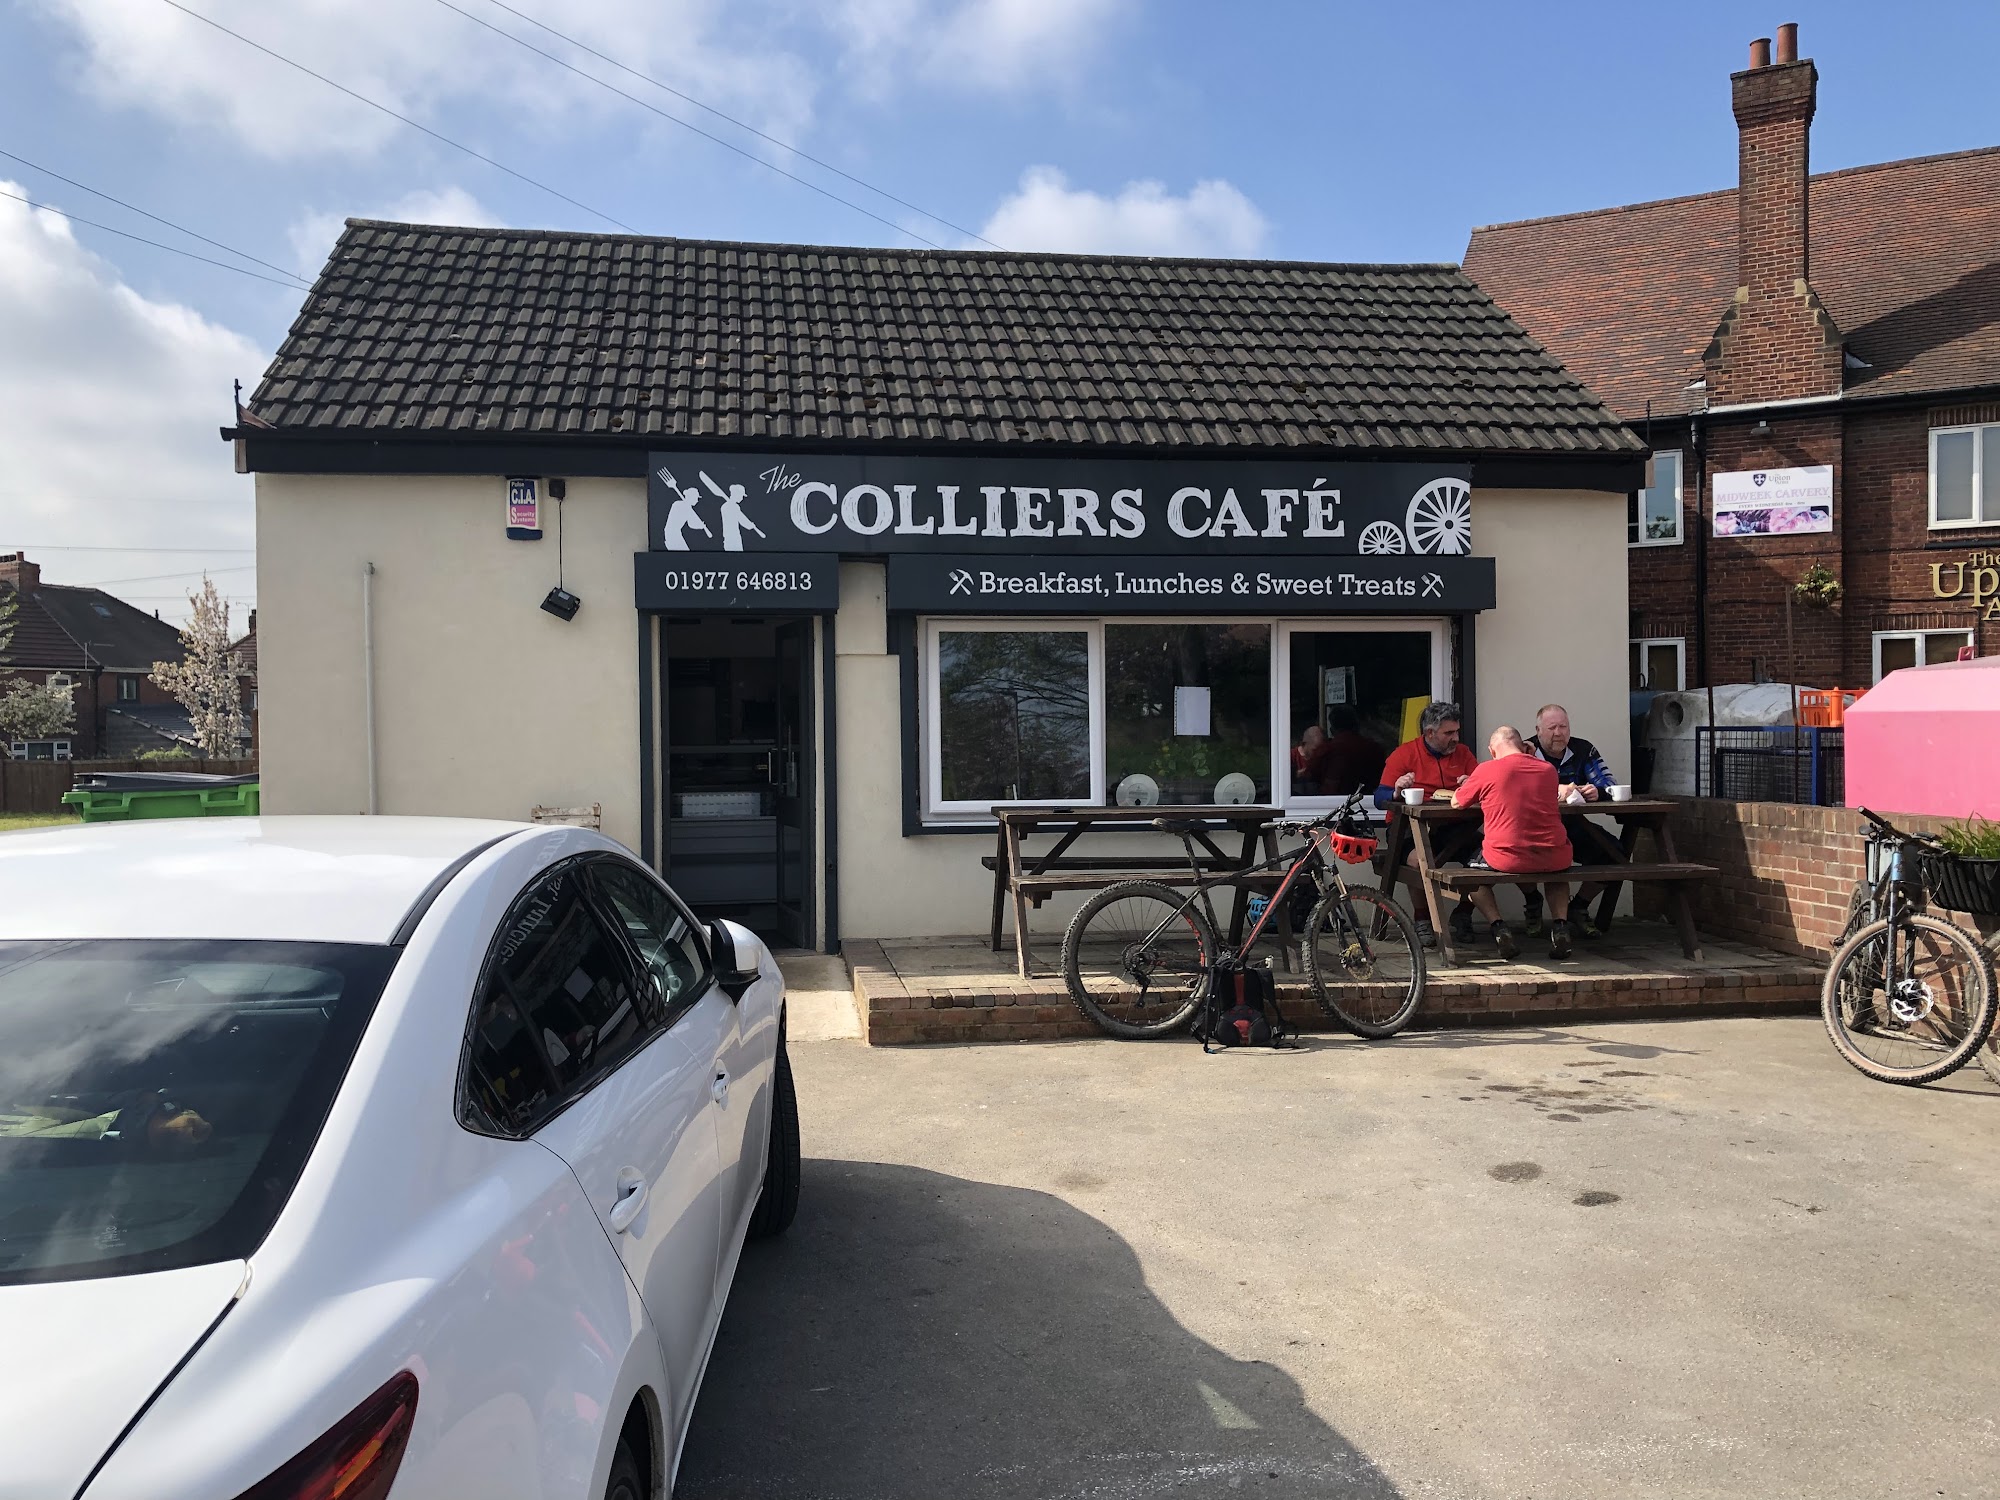 Old colliers cafe